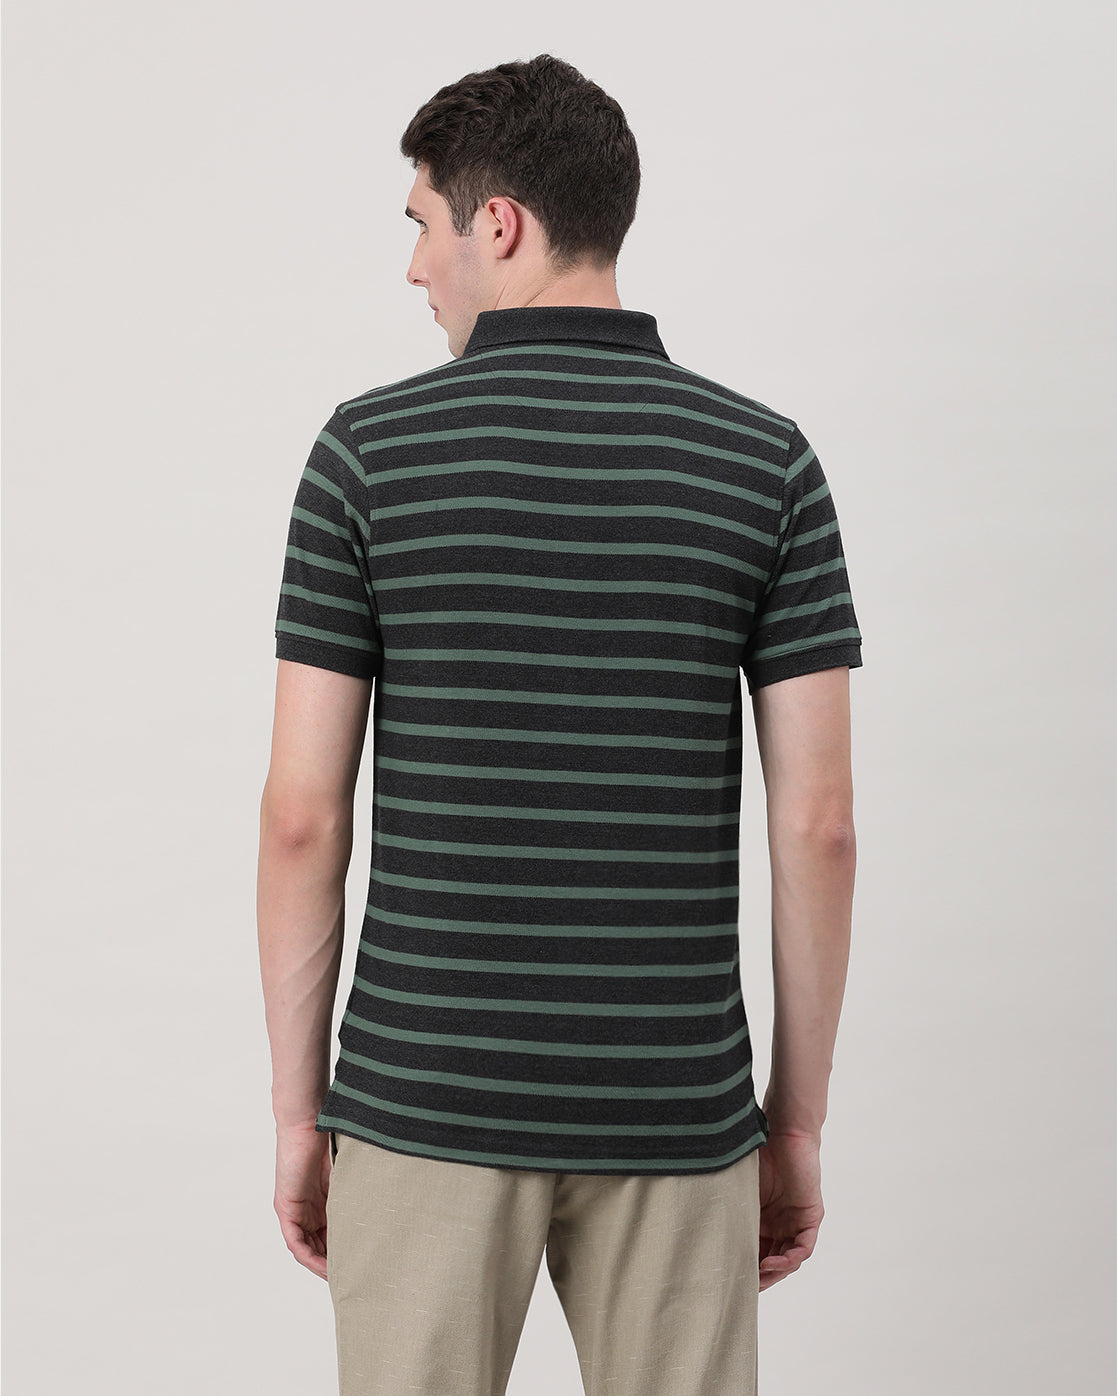 Casual Green T-Shirt Striper Half Sleeve Slim Fit with Collar